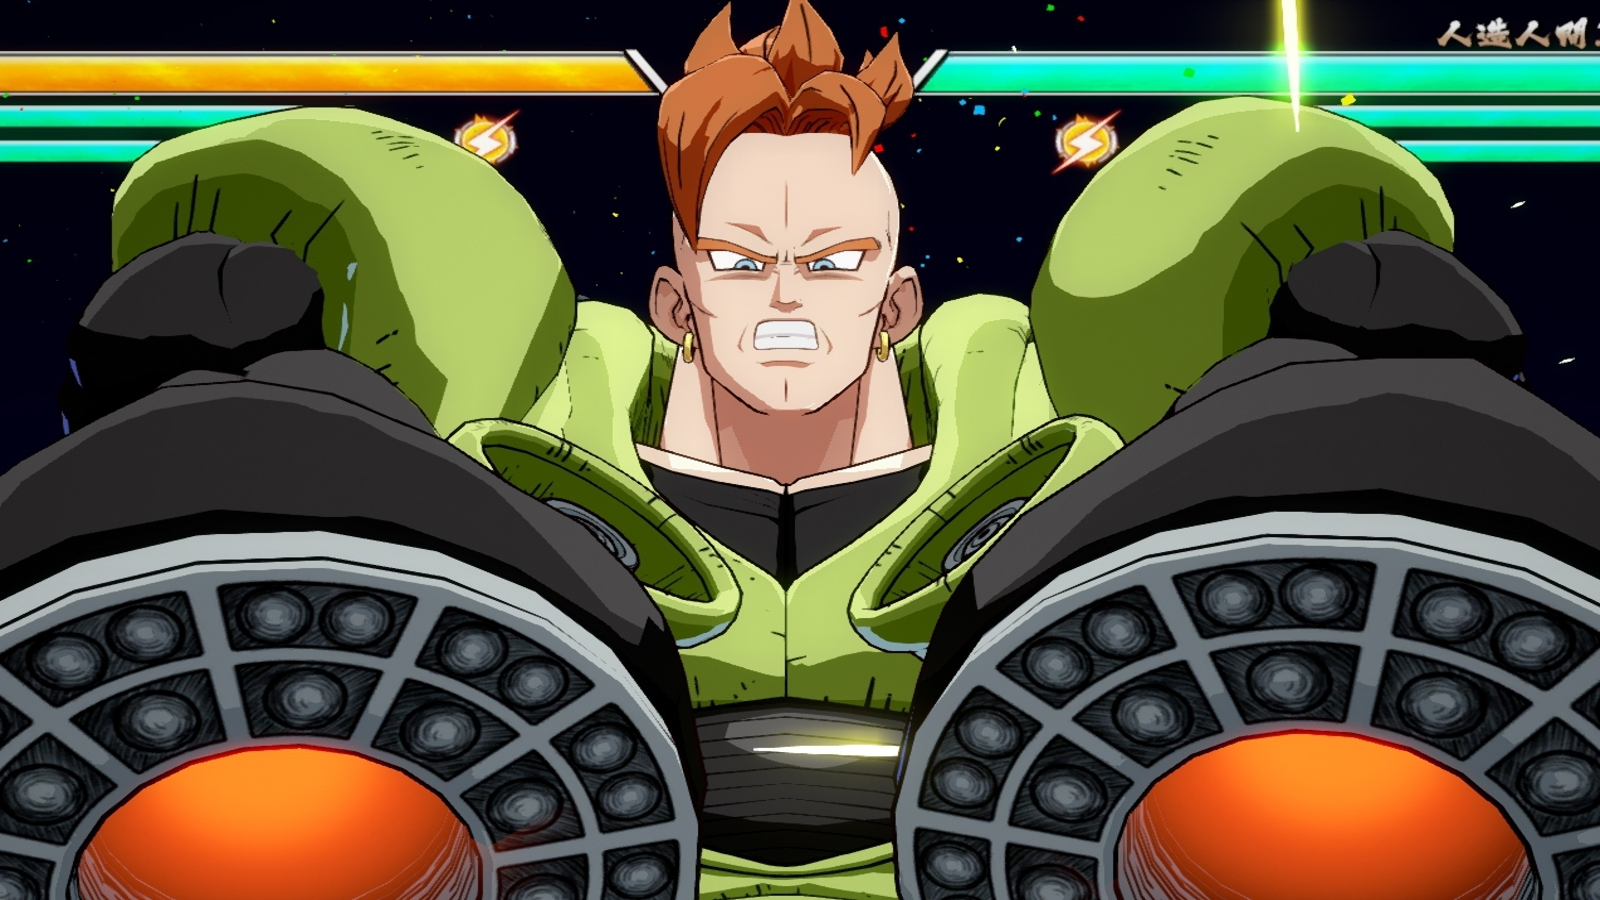 DRAGON BALL FighterZ - Android 16 Breakdown ft. Woolie